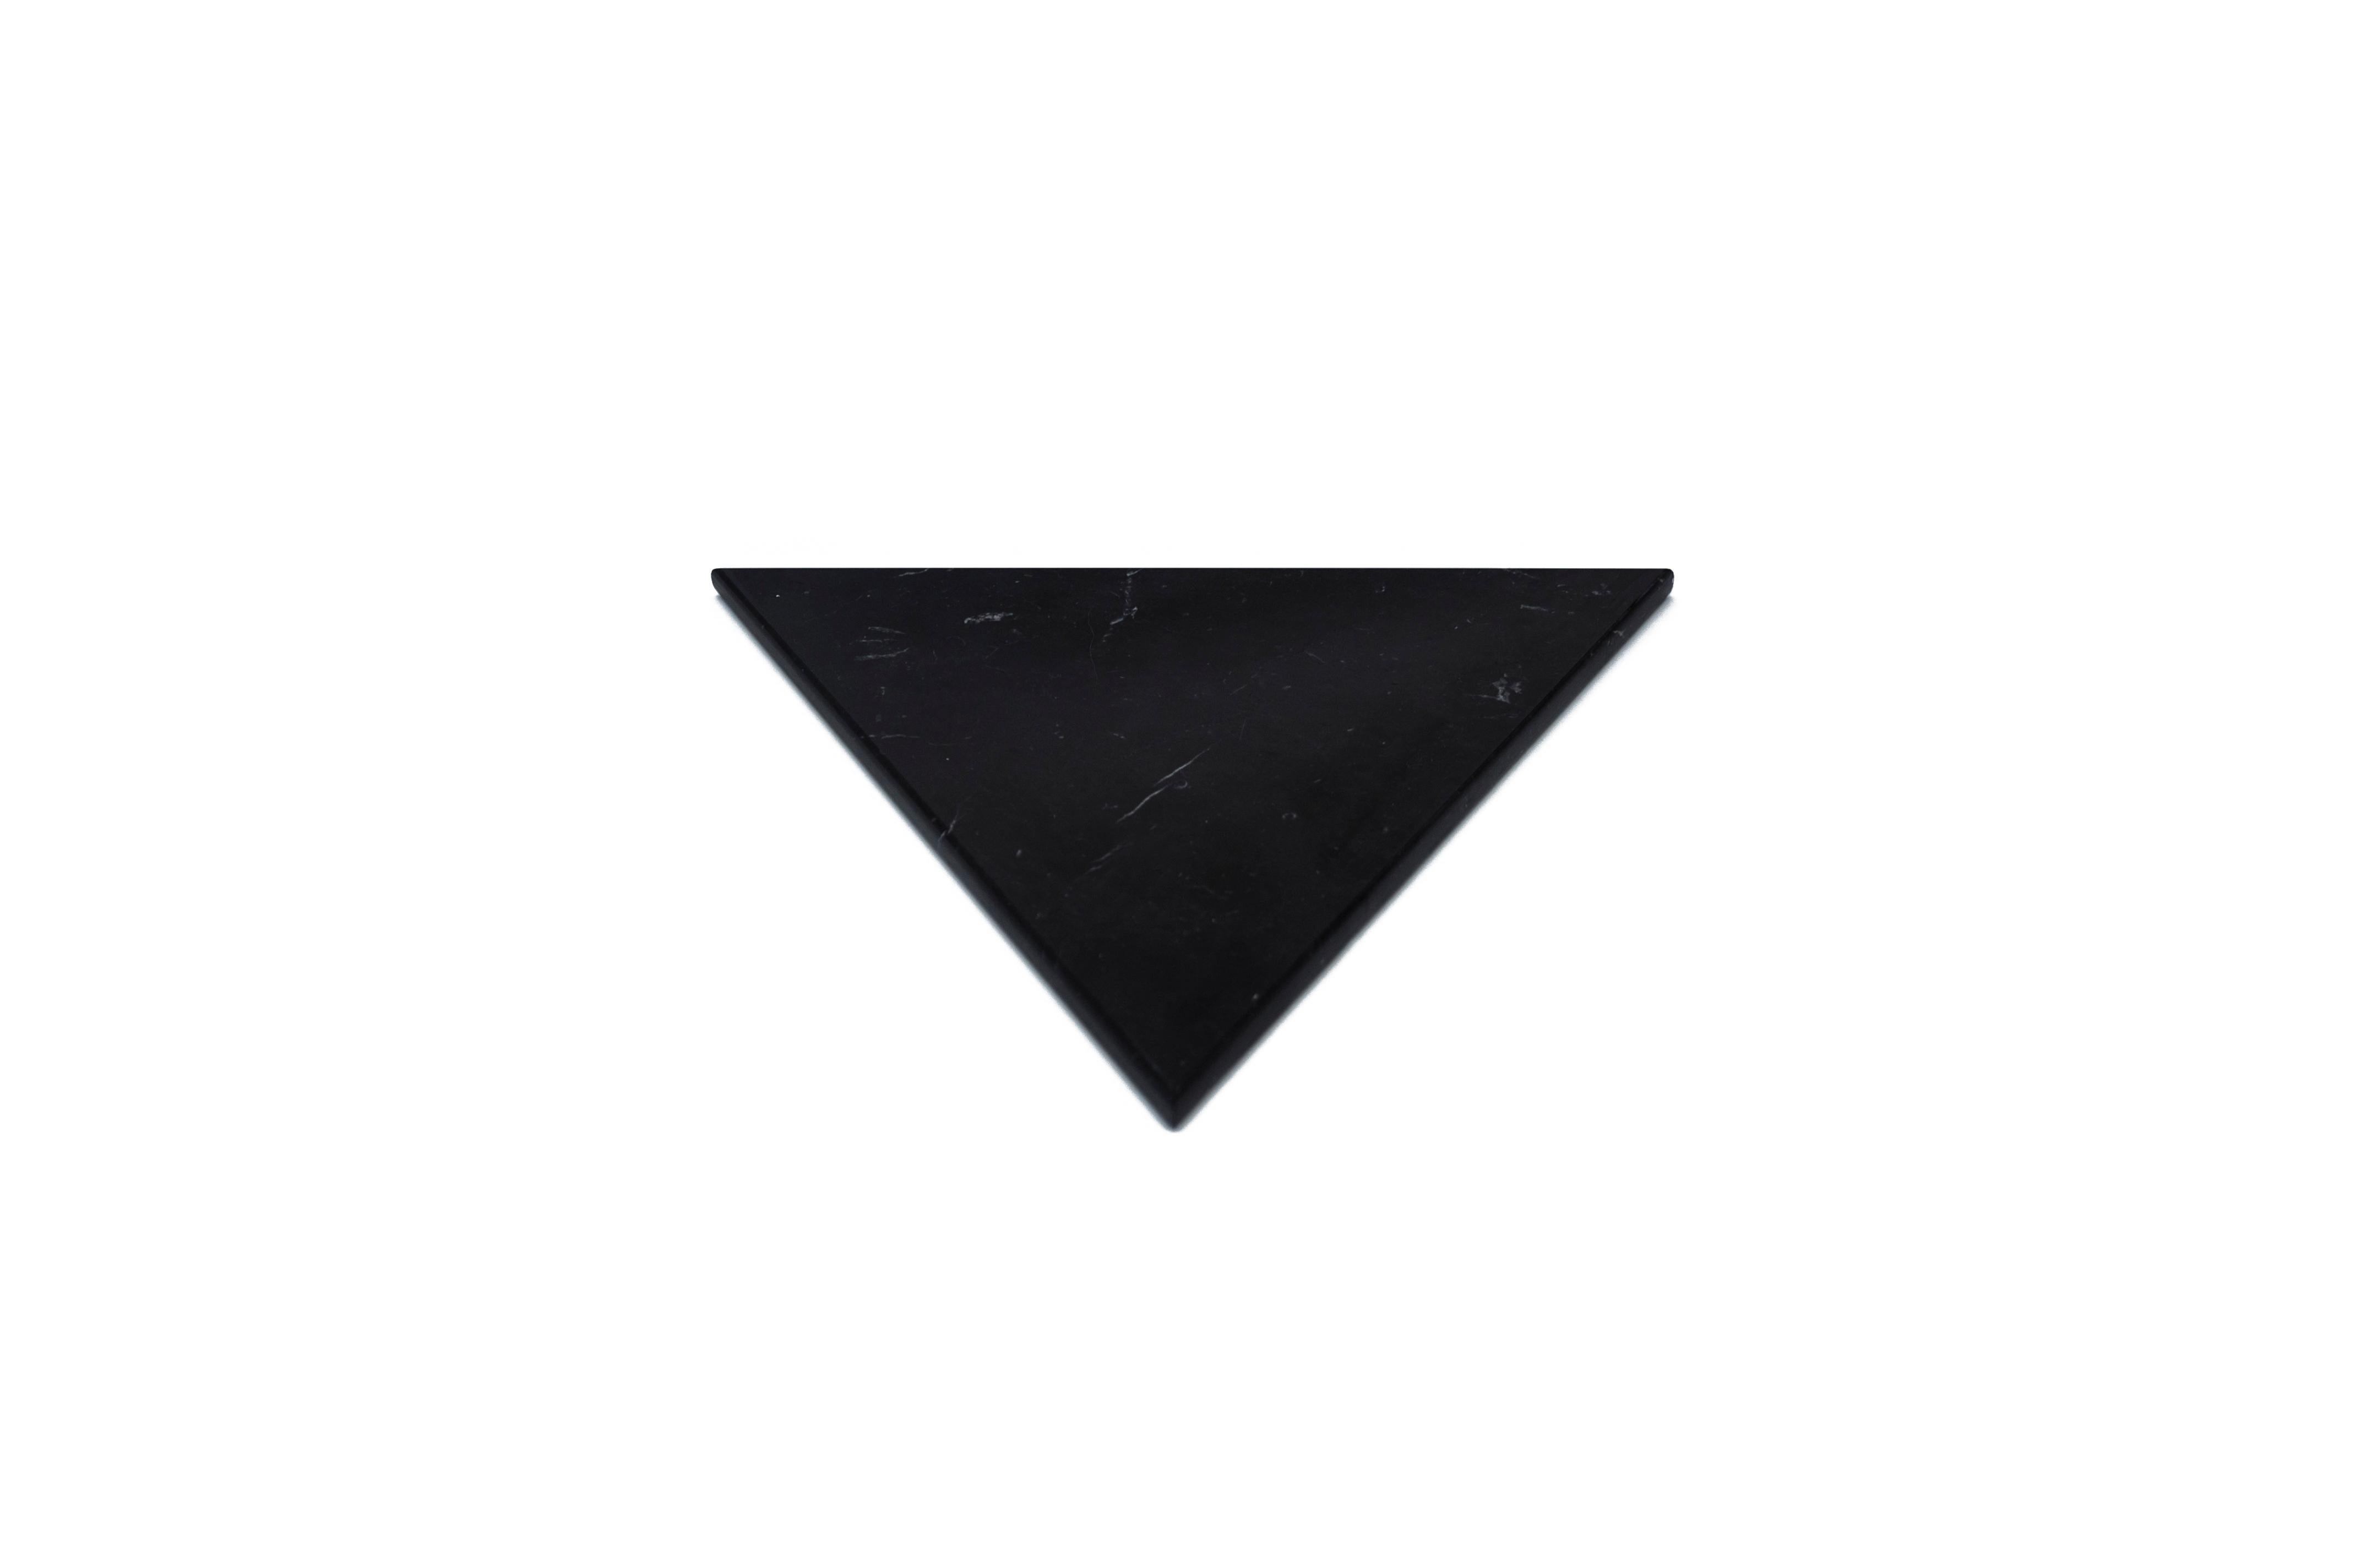 Black Marquina marble cutting board and serving tray with triangular shape and cork underneath. Each piece is in a way unique (every marble block is different in veins and shades) and handmade by Italian artisans specialized over generations in